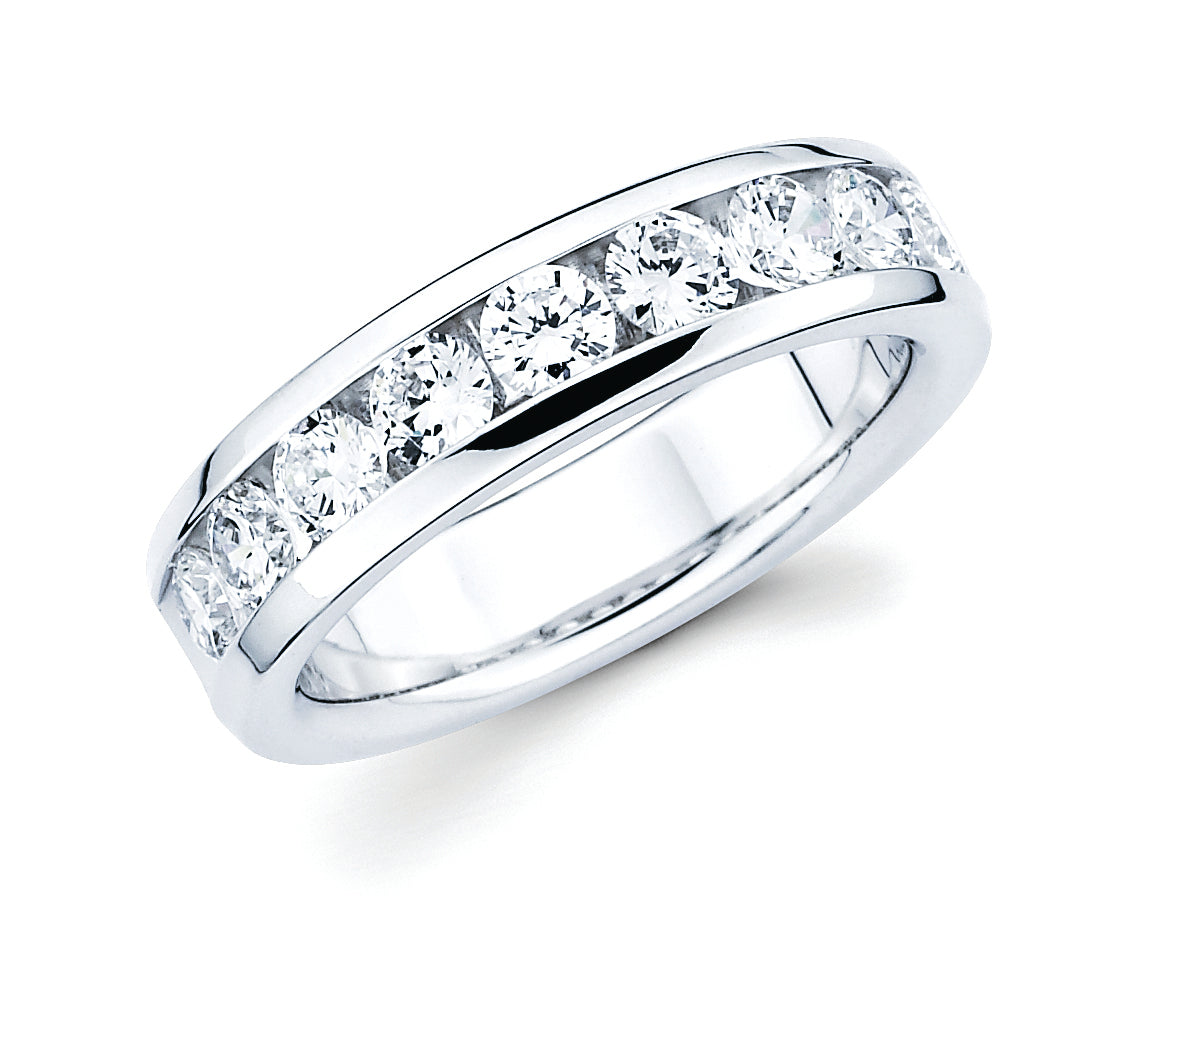 1.25 Ctw. Channel Set 10 Stone Diamond Anniversary Band in 14K Gold